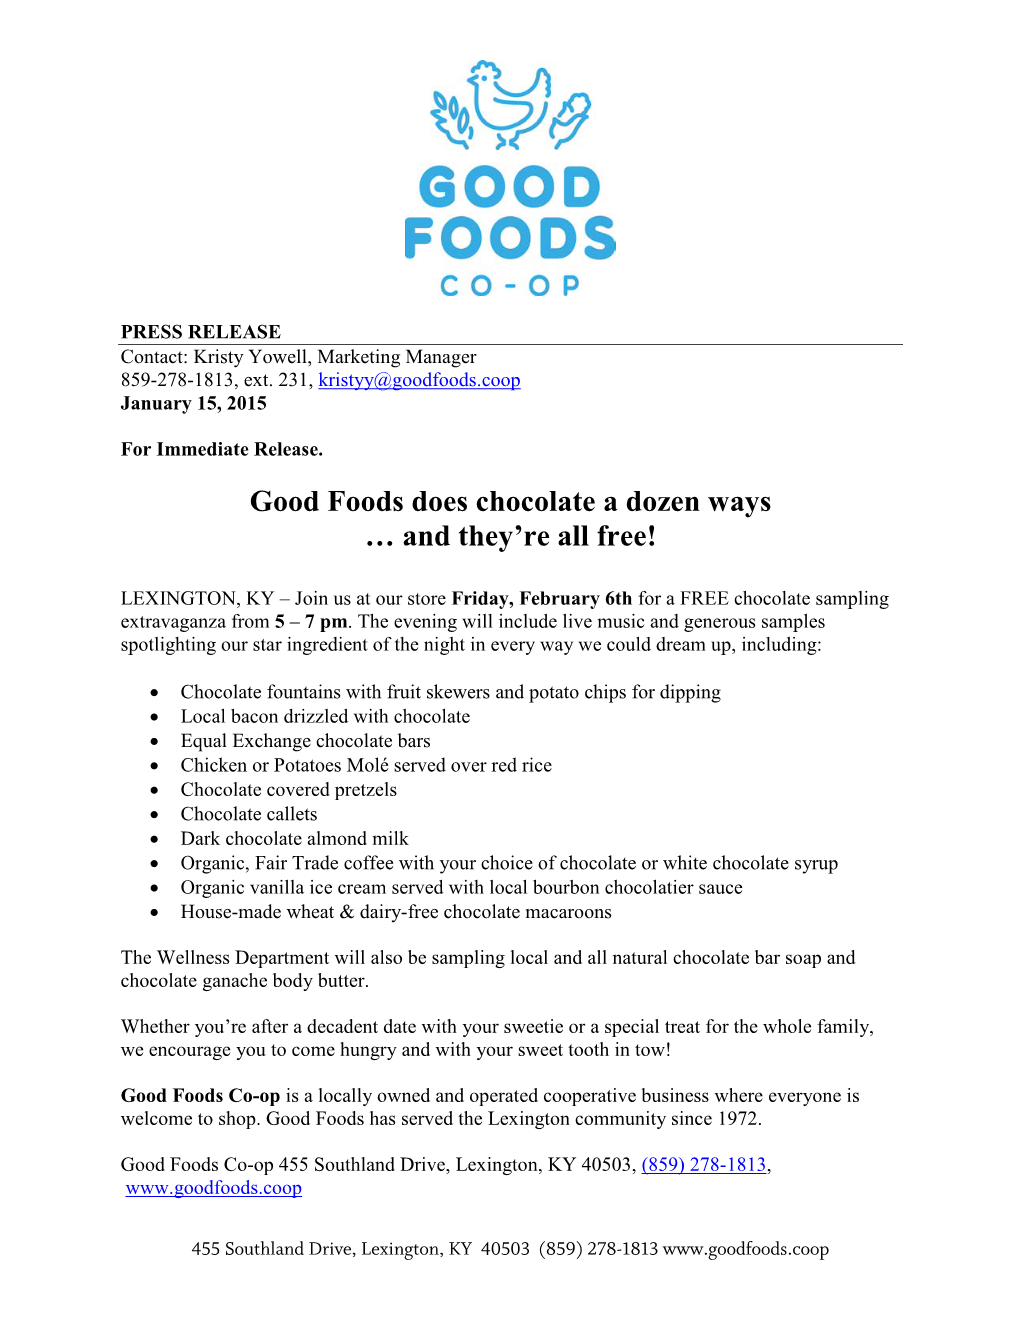 Good Foods Does Chocolate a Dozen Ways … and They’Re All Free!